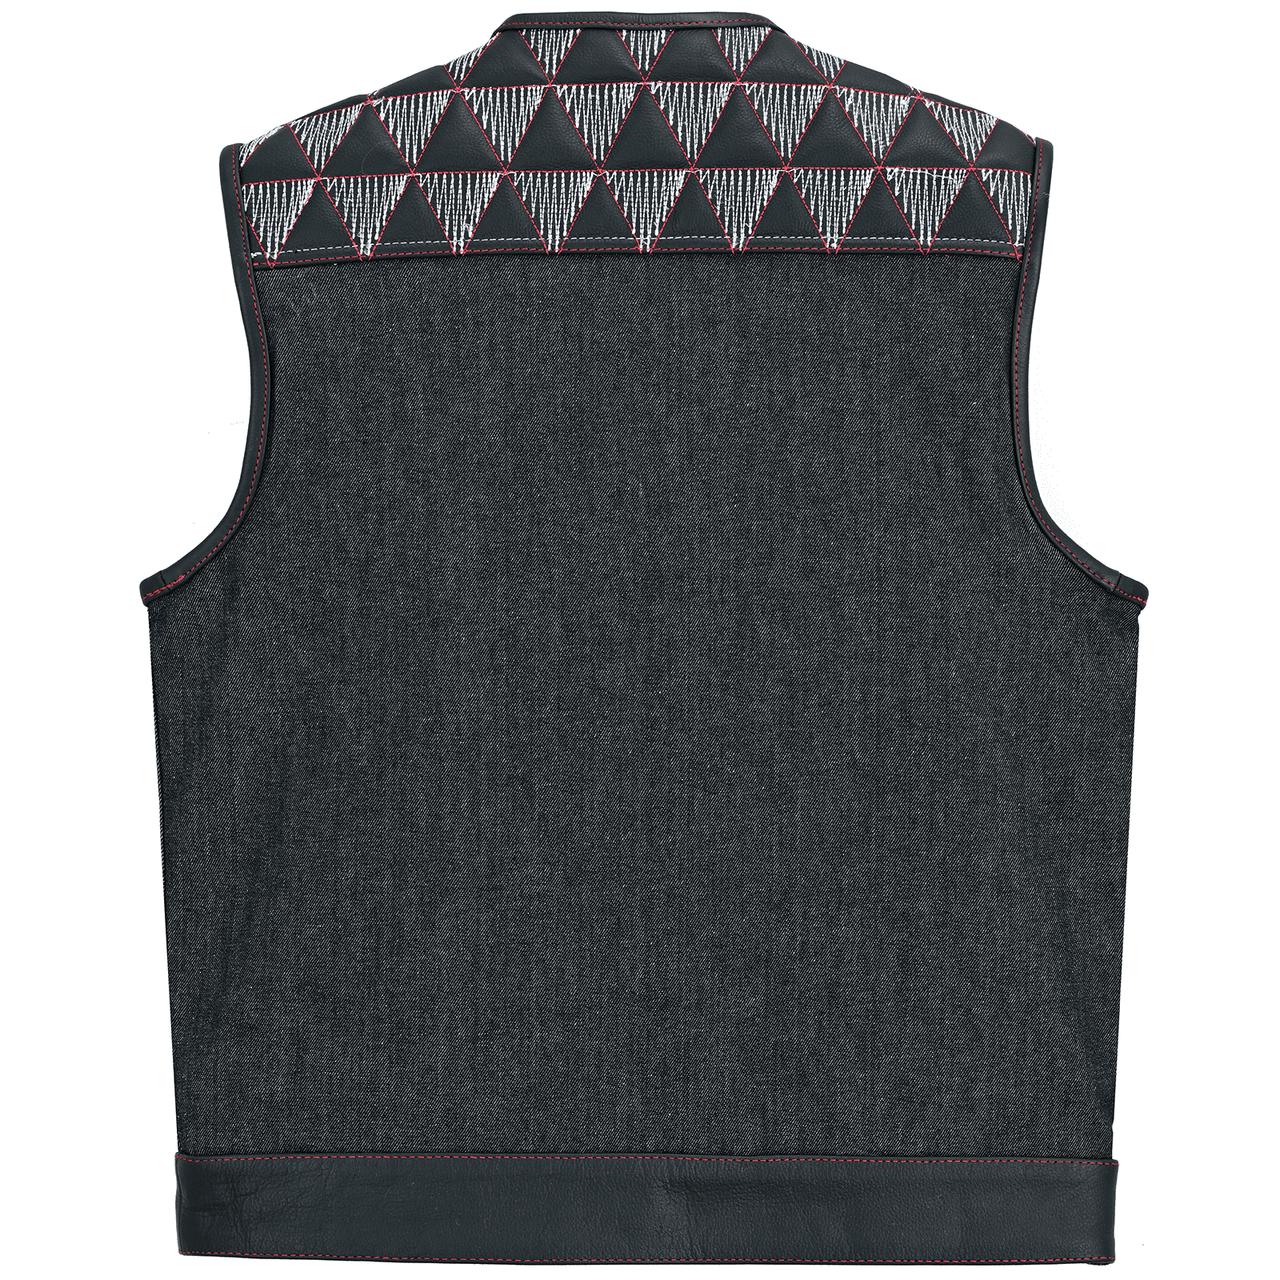 Men's-Denim-Leather-Motorcycle-Vest-with-Conceal-Carry-Pockets-SOA-Biker-Club-Vest-Red-White-Stitching-back-view